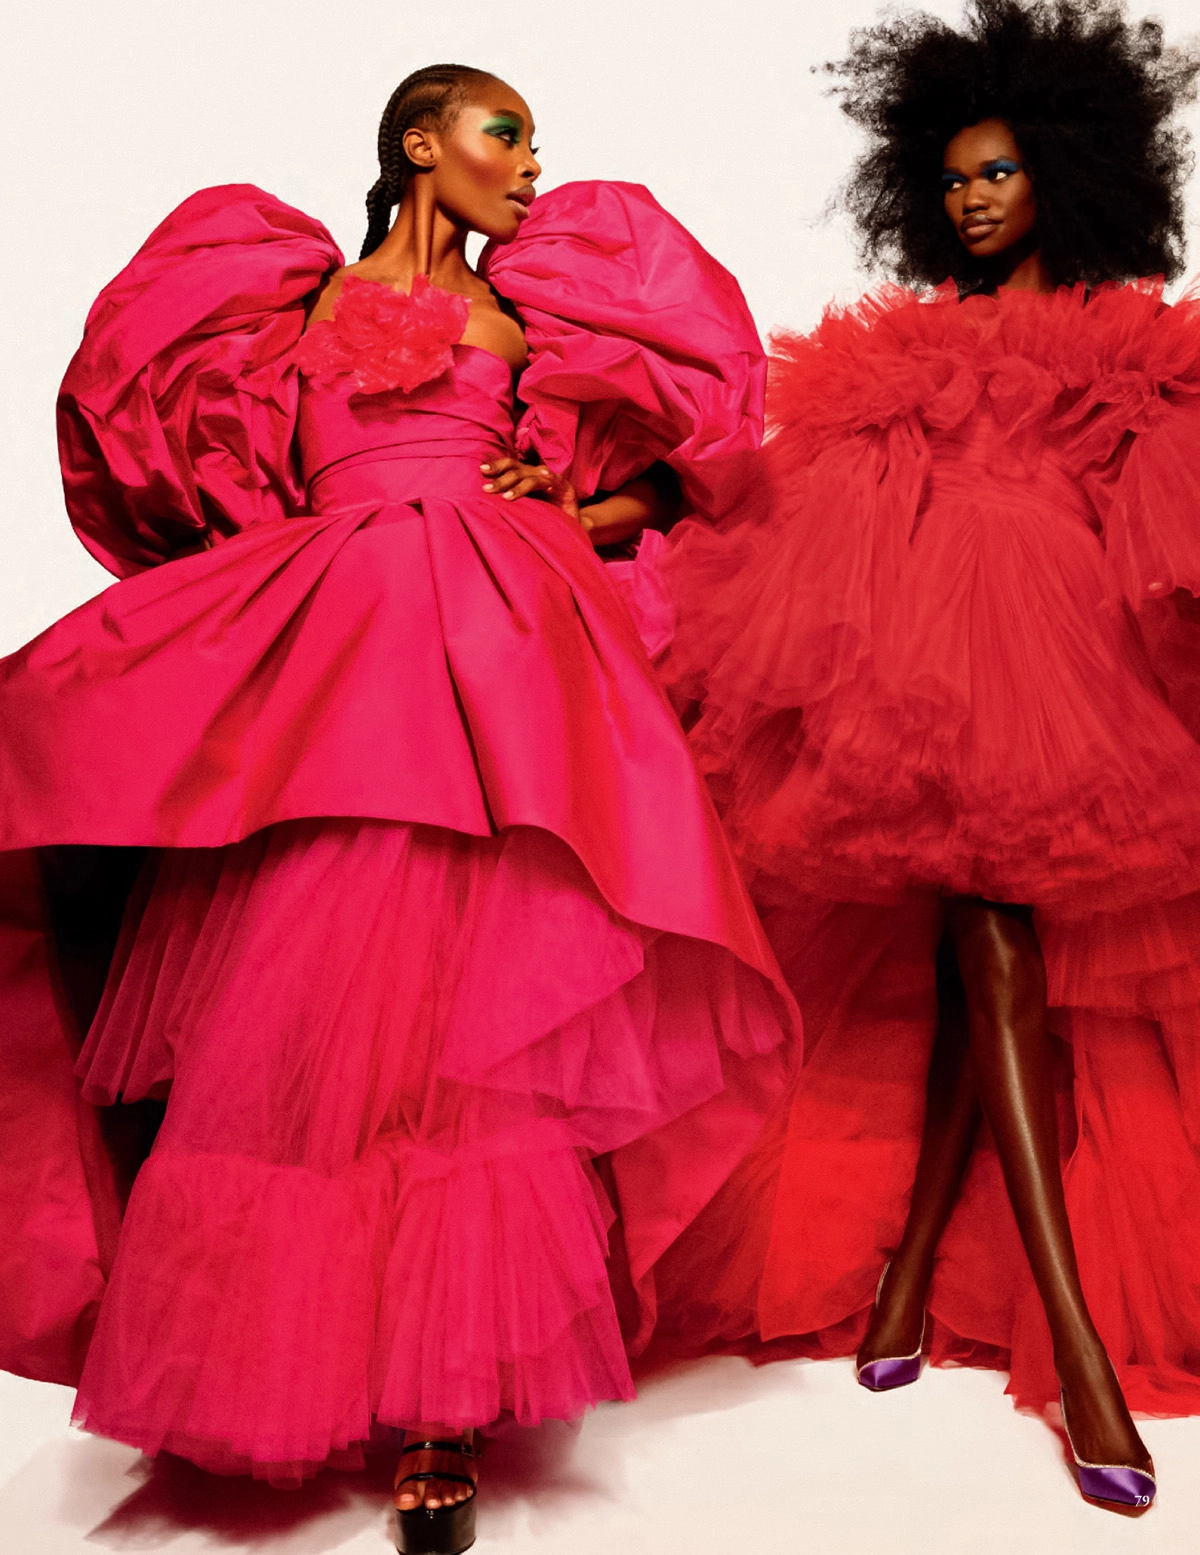 ''Welcome To Our Haute Couture Party!'' by Daniel Sachon for Tatler UK June 2022